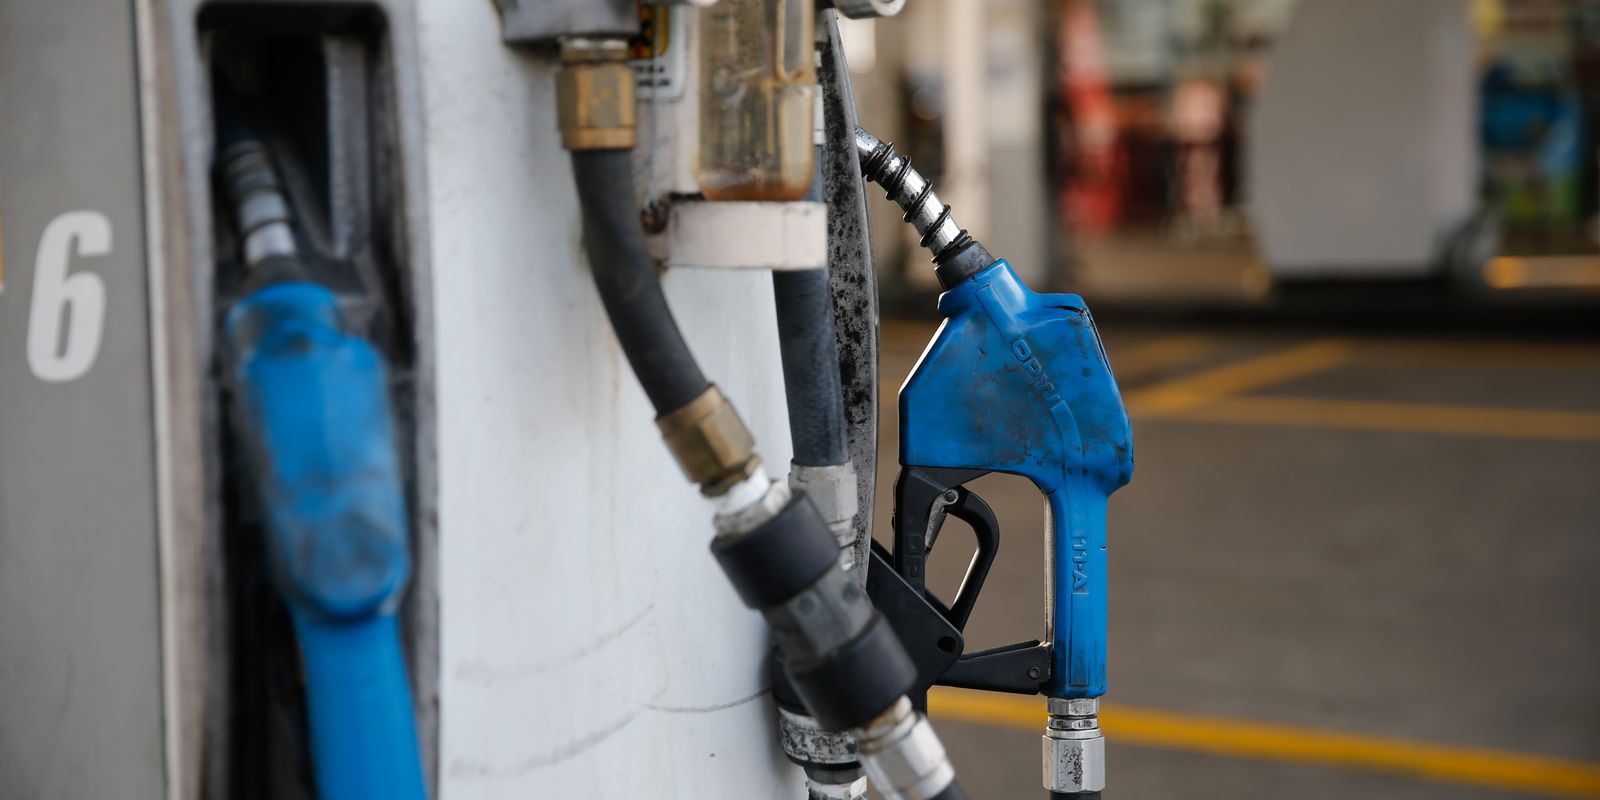 Gasoline and anhydrous alcohol have a single rate of R$ 1.22 on June 1